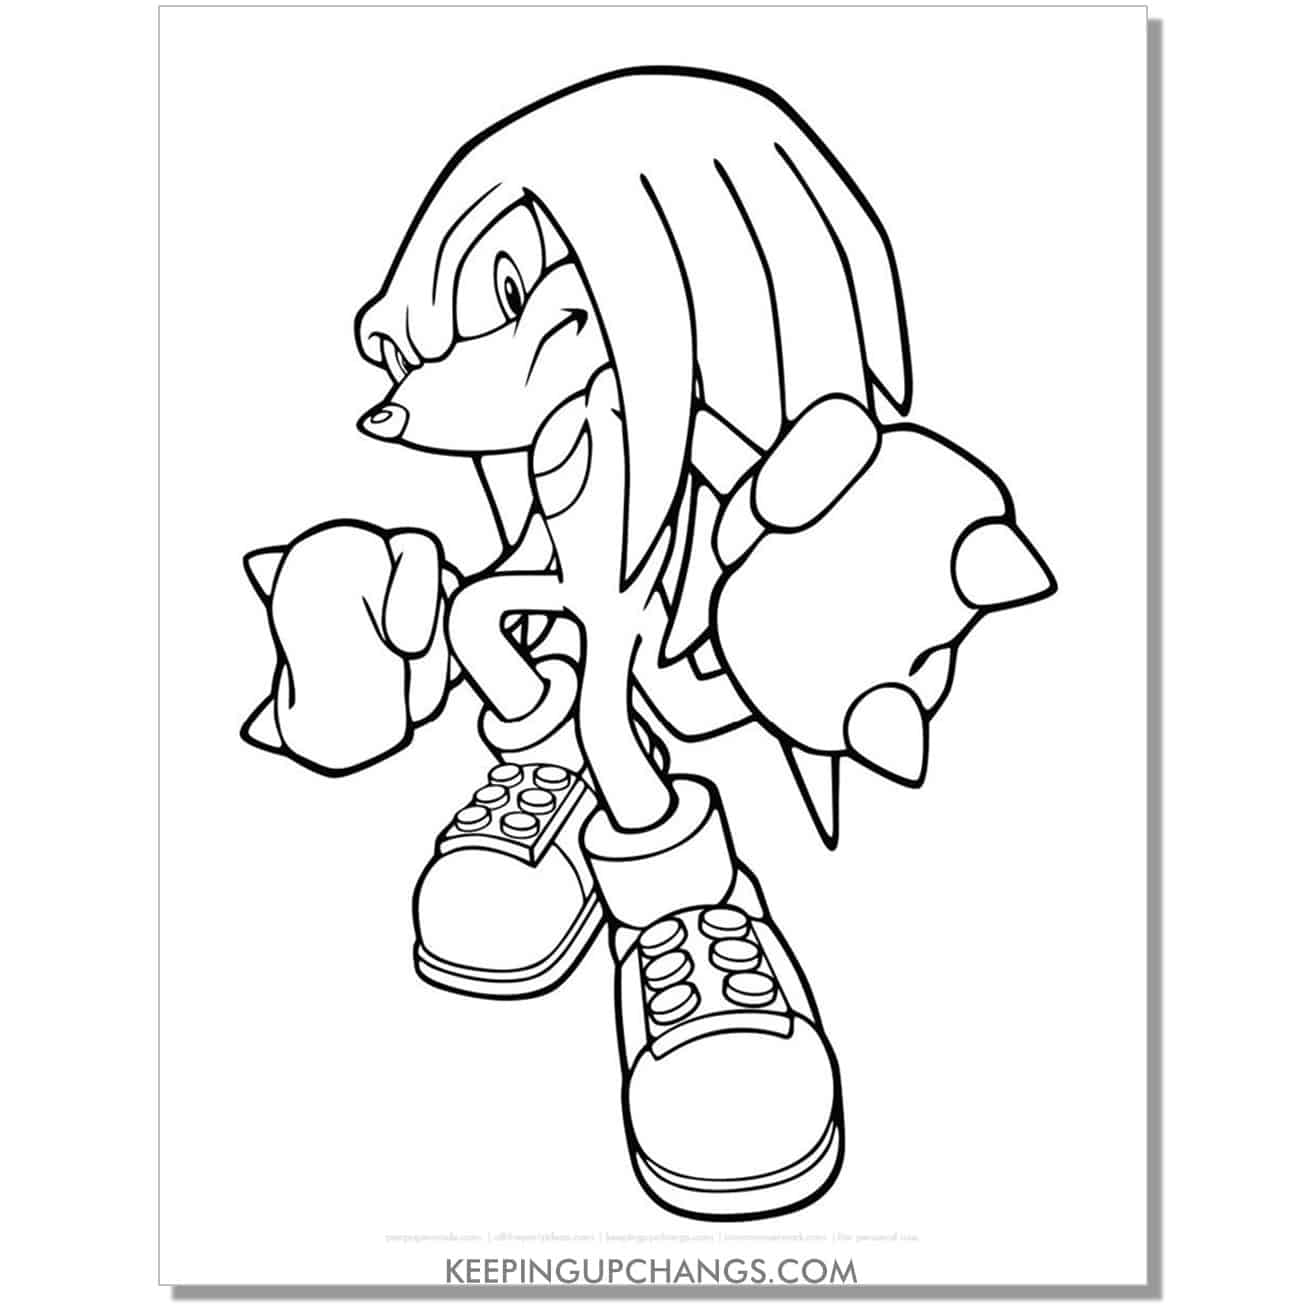 knuckles with leg up sonic coloring page.